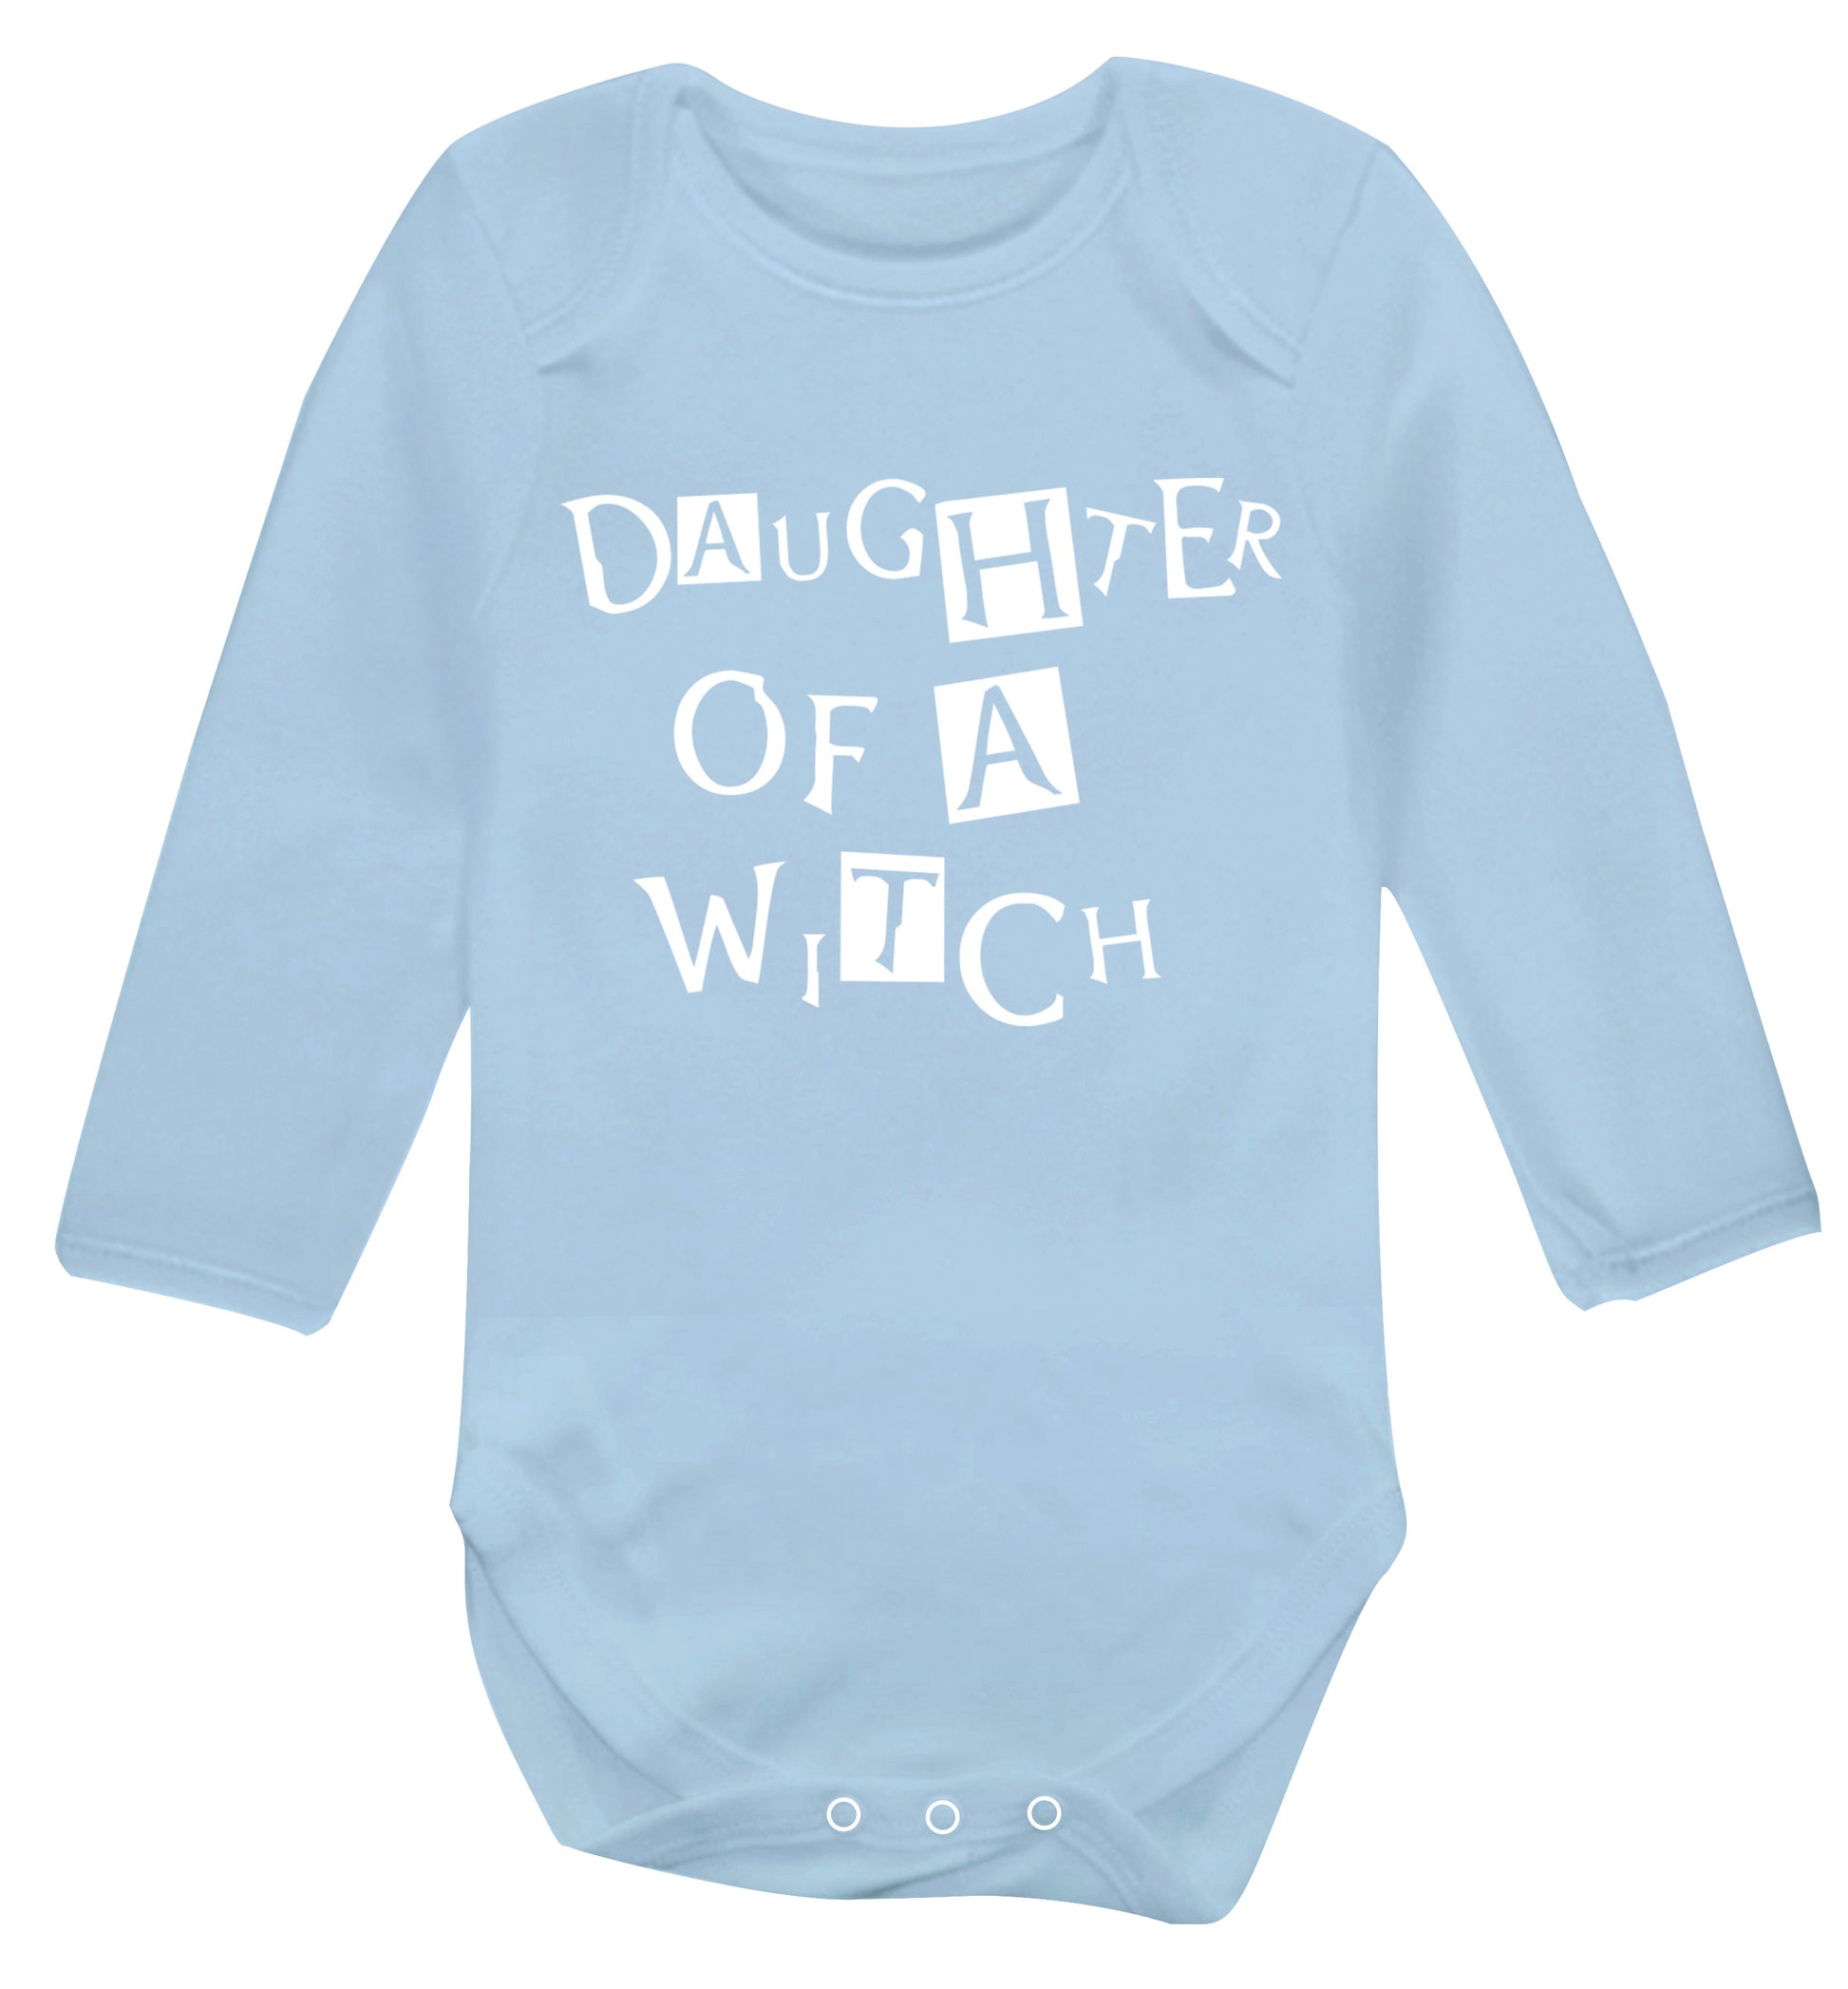 Daughter of a witch Baby Vest long sleeved pale blue 6-12 months